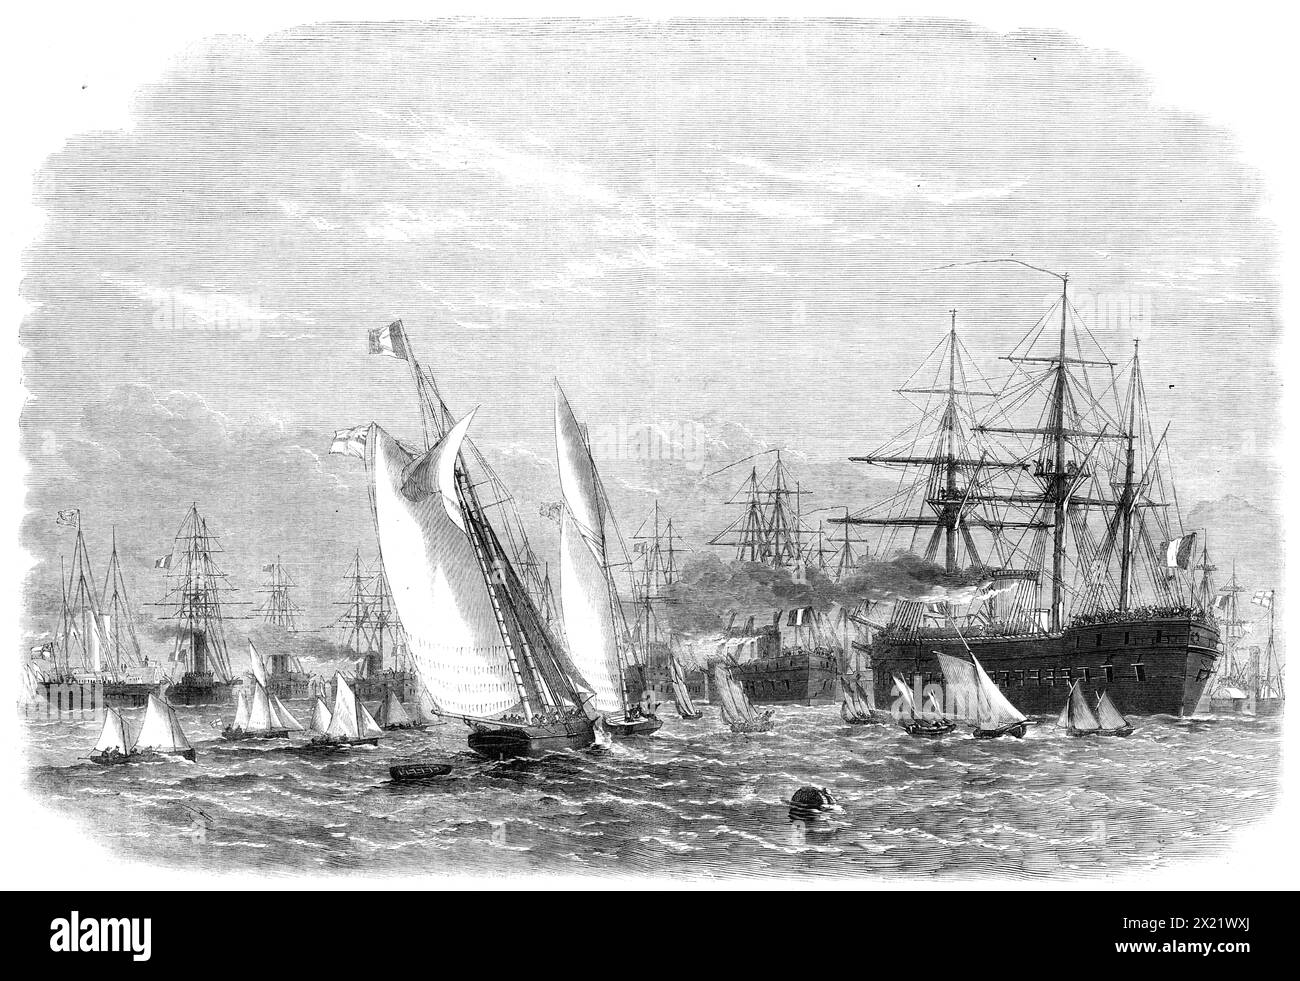 The International Naval Festival at Portsmouth: the French fleet leaving Spithead, 1865. 'The ships composing the French squadron...[included] the Solferino and Magenta, two-deckers, ironclads, of 7000 tons burden, carrying fifty-two guns...the Normandie, La Gloire, La Couronne, Invincible, Provence, Heroine, and Flandre, frigates; the Caton, Ariel, and Faon, smaller vessels; the Reine Hortense, Imperial yacht. The squadron took its departure very quietly about nine o'clock in the morning'. From &quot;Illustrated London News&quot;, 1865. Stock Photo